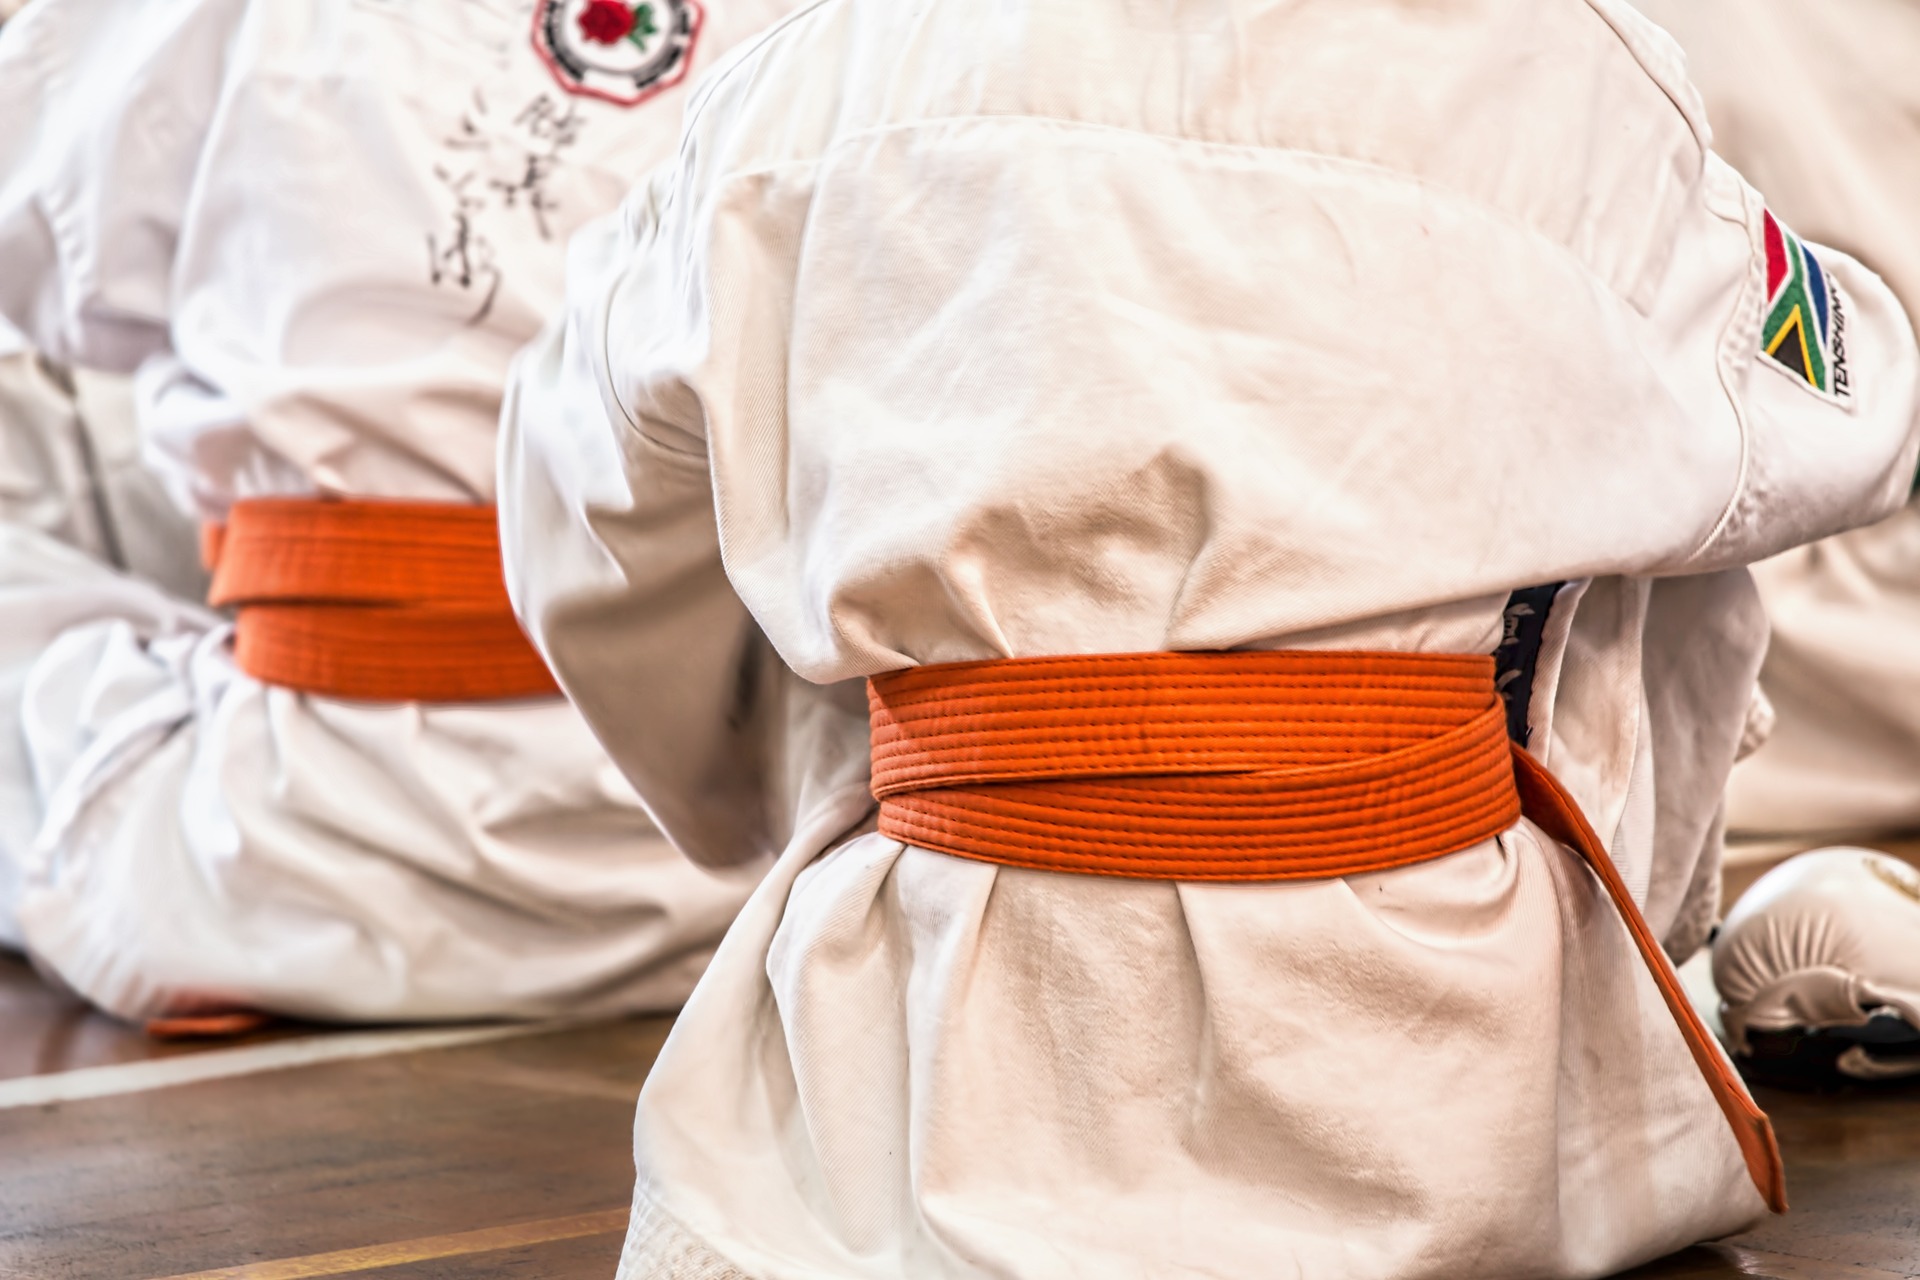 5 Benefits of Martial Arts for Health and Wellbeing